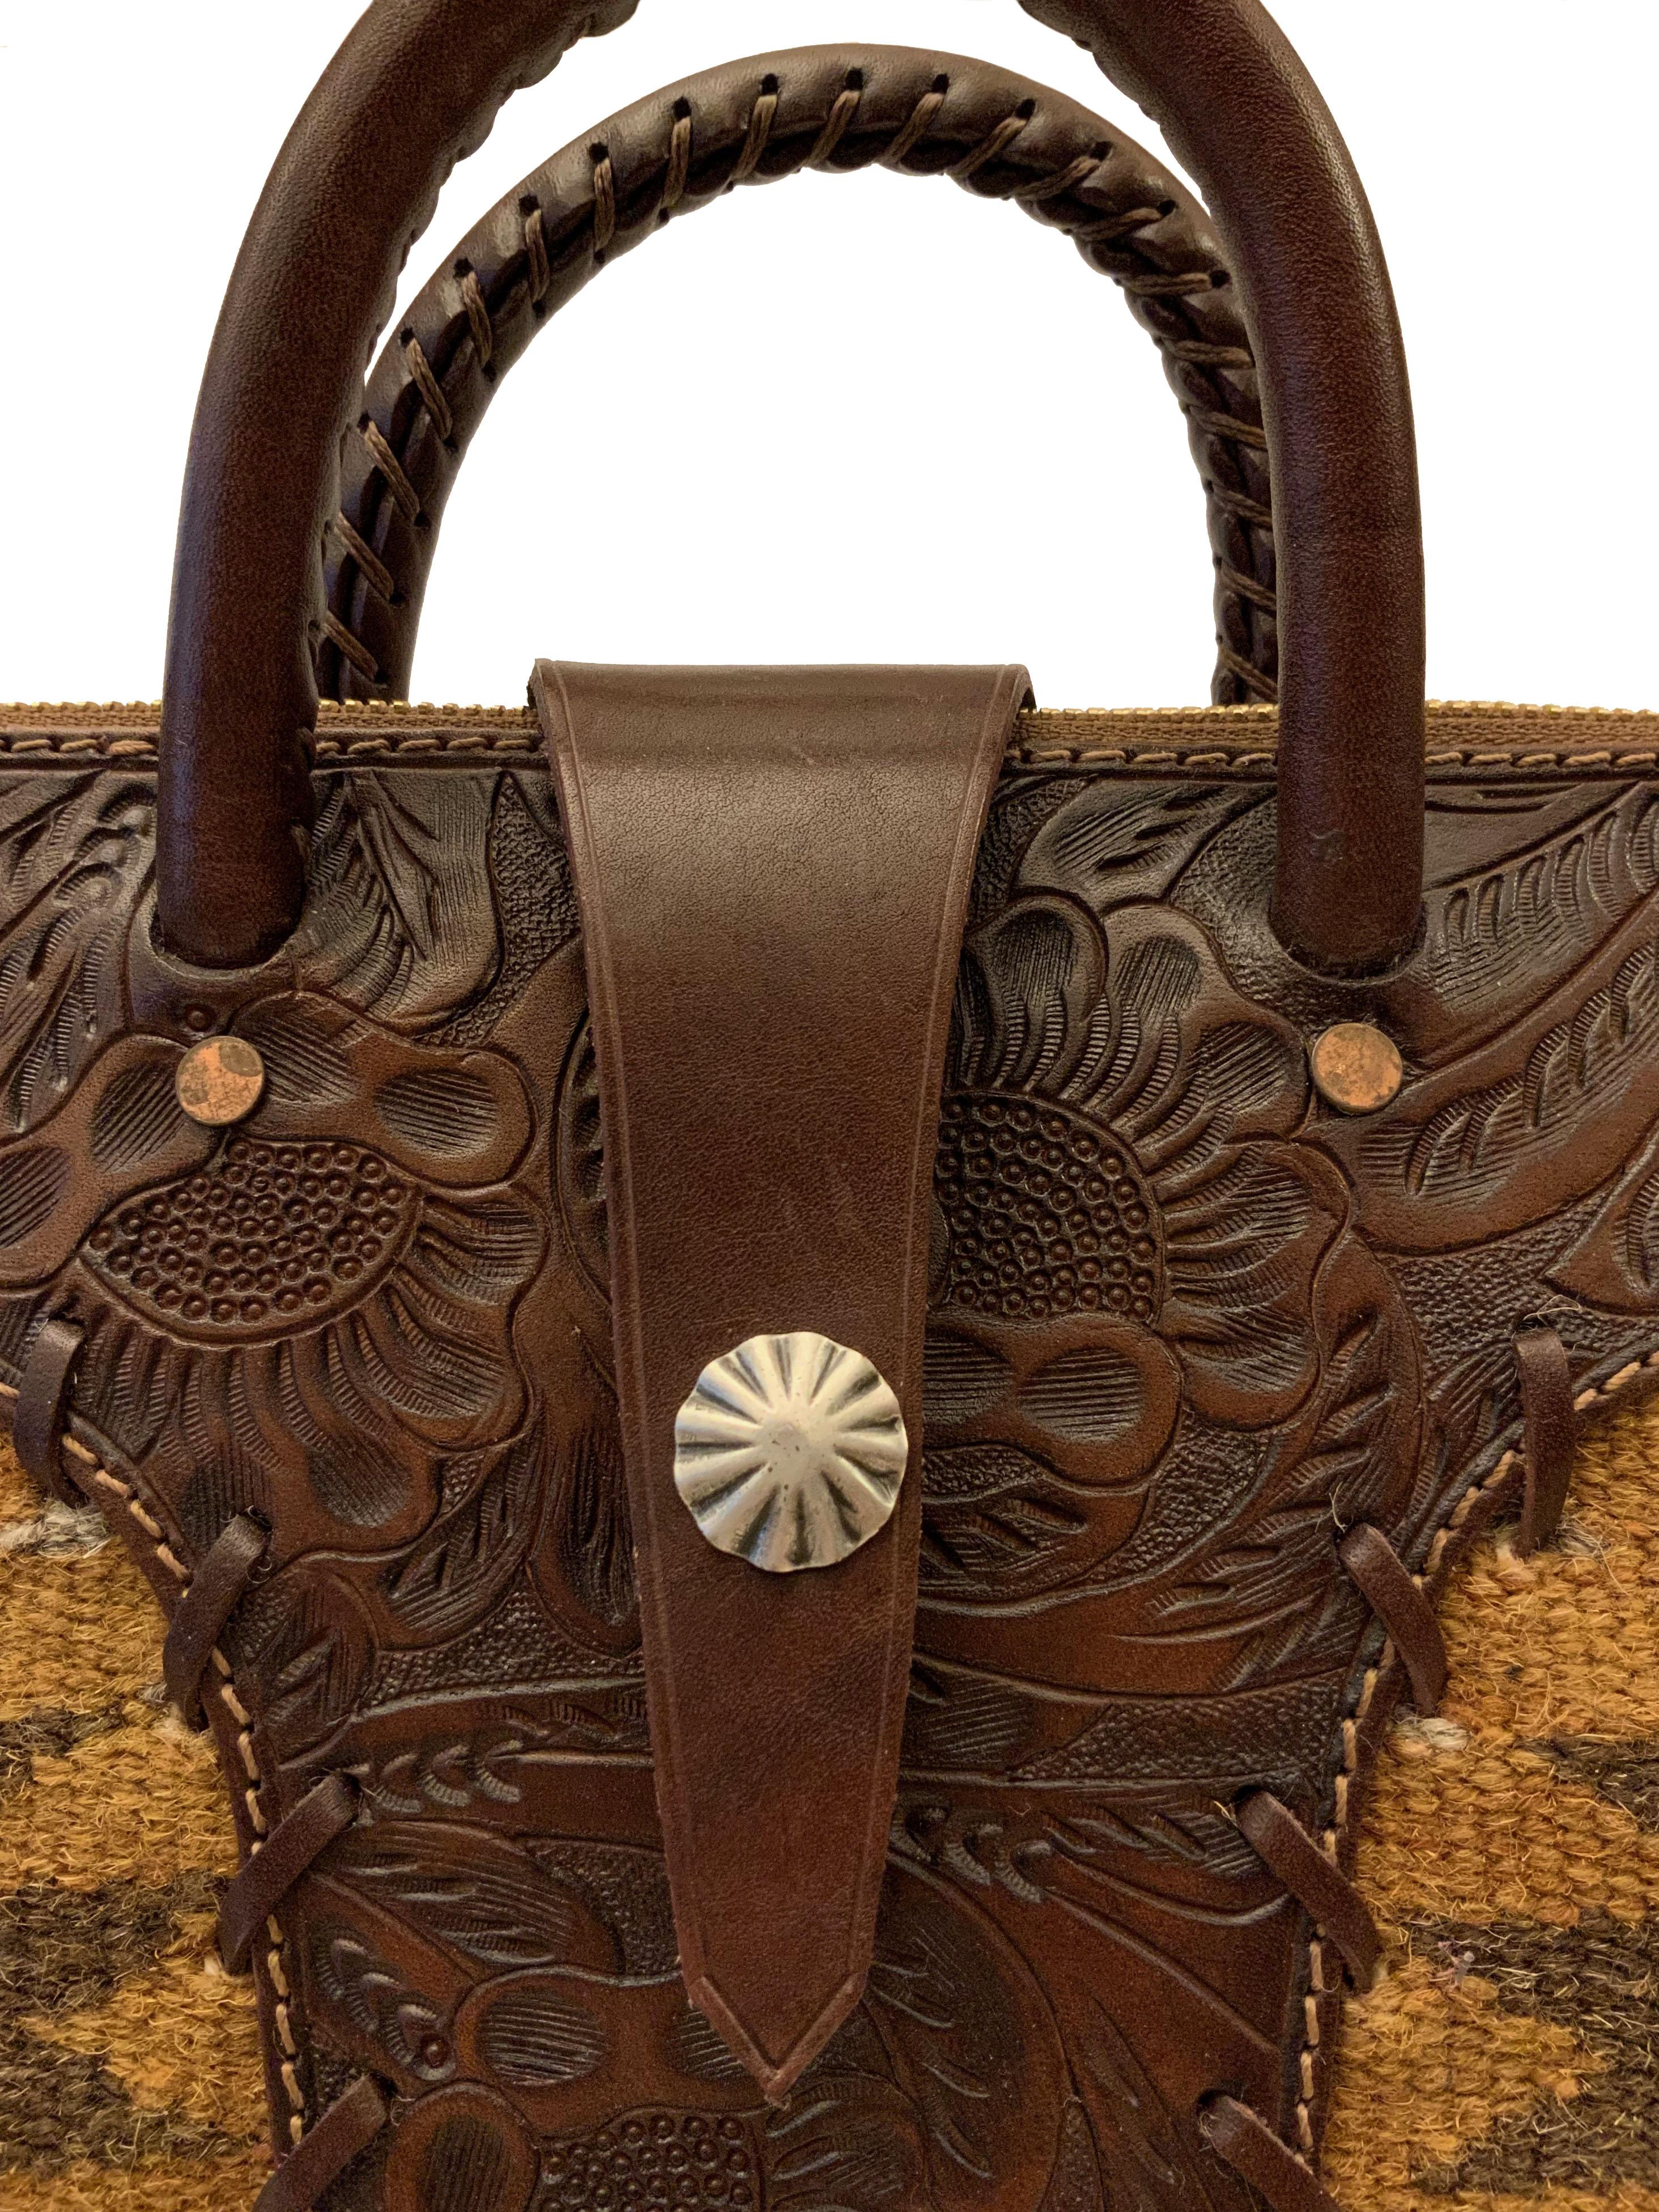 This bag from the house of Ralph Lauren RRL is made from naturally dyed hand-woven textiles with a 30's Southwestern inspired pattern.
The leather panels are hand-tooled.
The double handle allows a hand carry and the adjustable strap goes for the